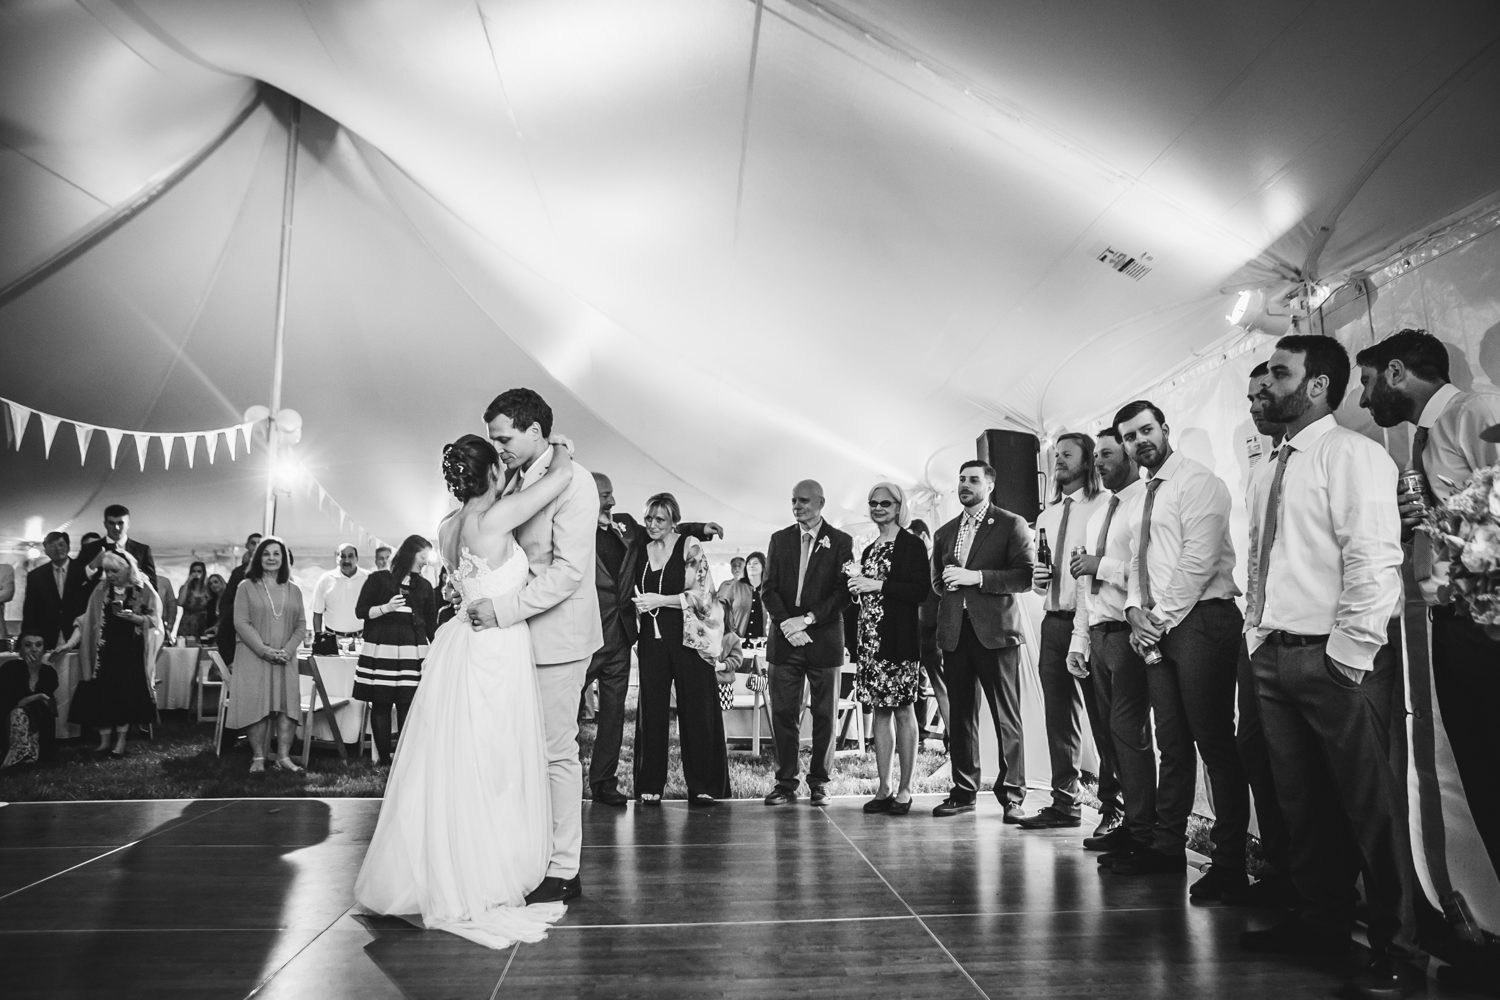 Emily Tebbetts Photography - back yard wedding gif atkinson nh confetti recessional bride and groom pizza truck -12.jpg